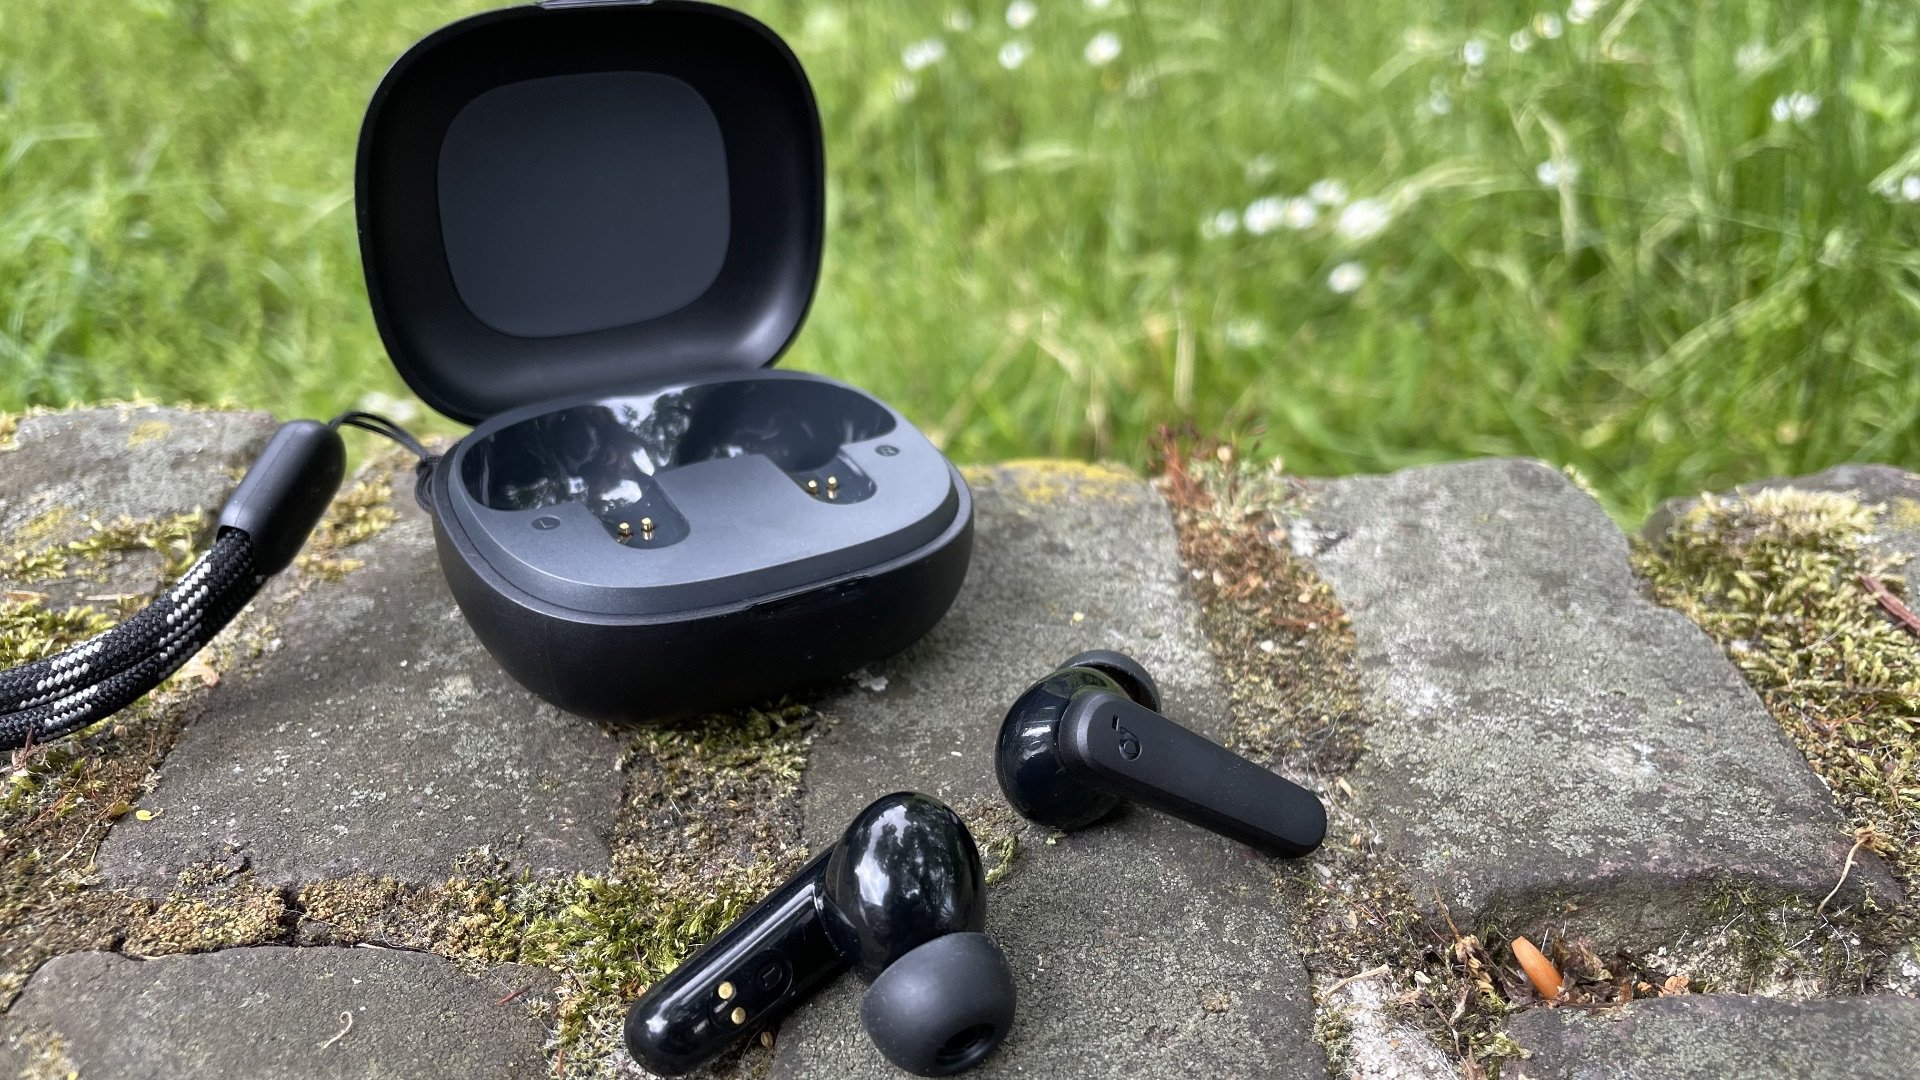 Soundcore P20i review: Better than the Soundcore A20i and P2i?